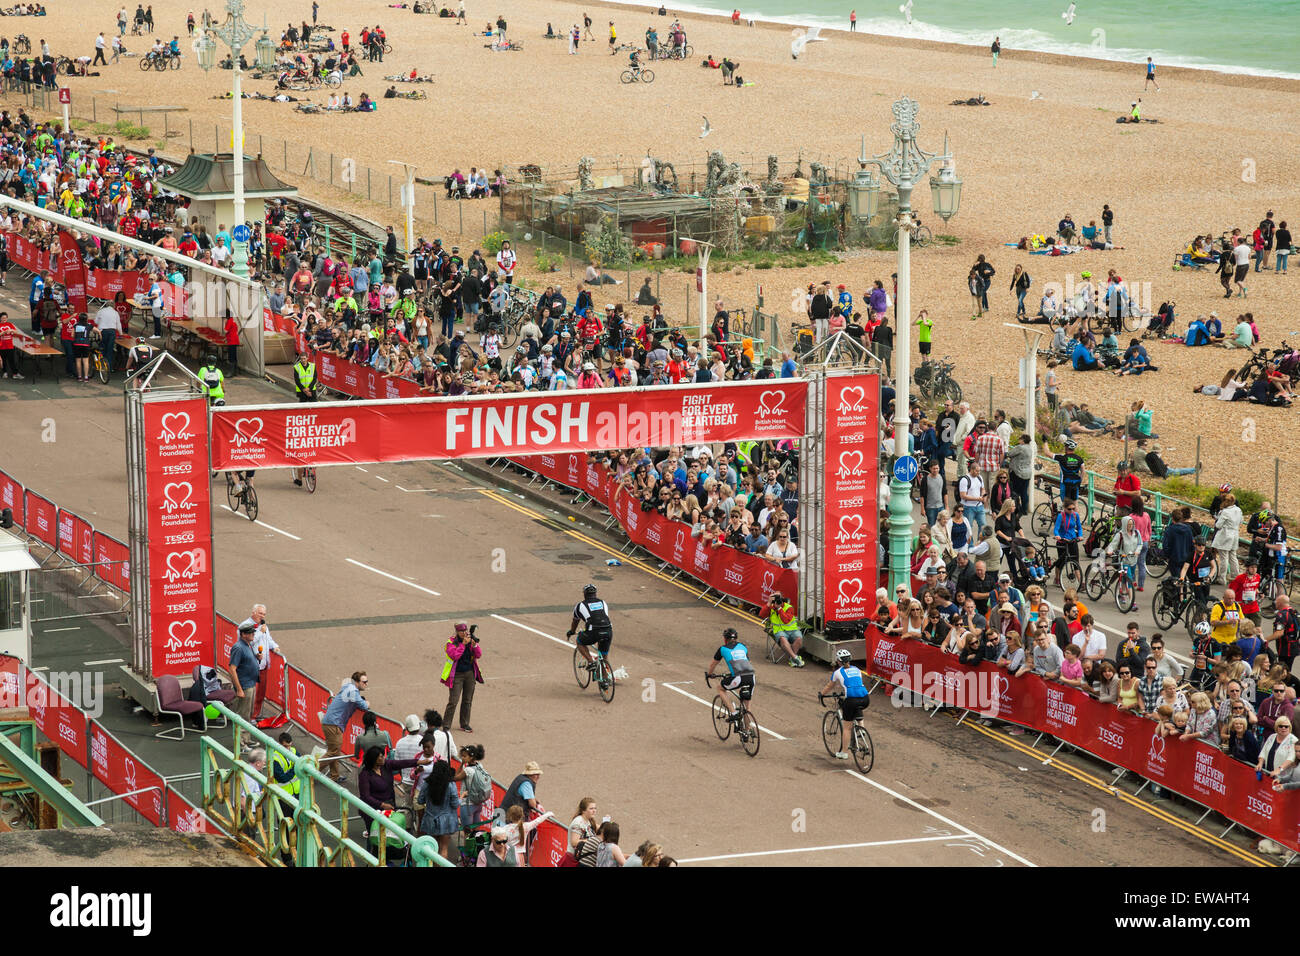 Brighton, UK. 21st June, 2015. Cyclists pass the finish line. Crowd of onlookers cheers. Brighton beach in the background. Credit:  Slawek Staszczuk/Alamy Live News Stock Photo